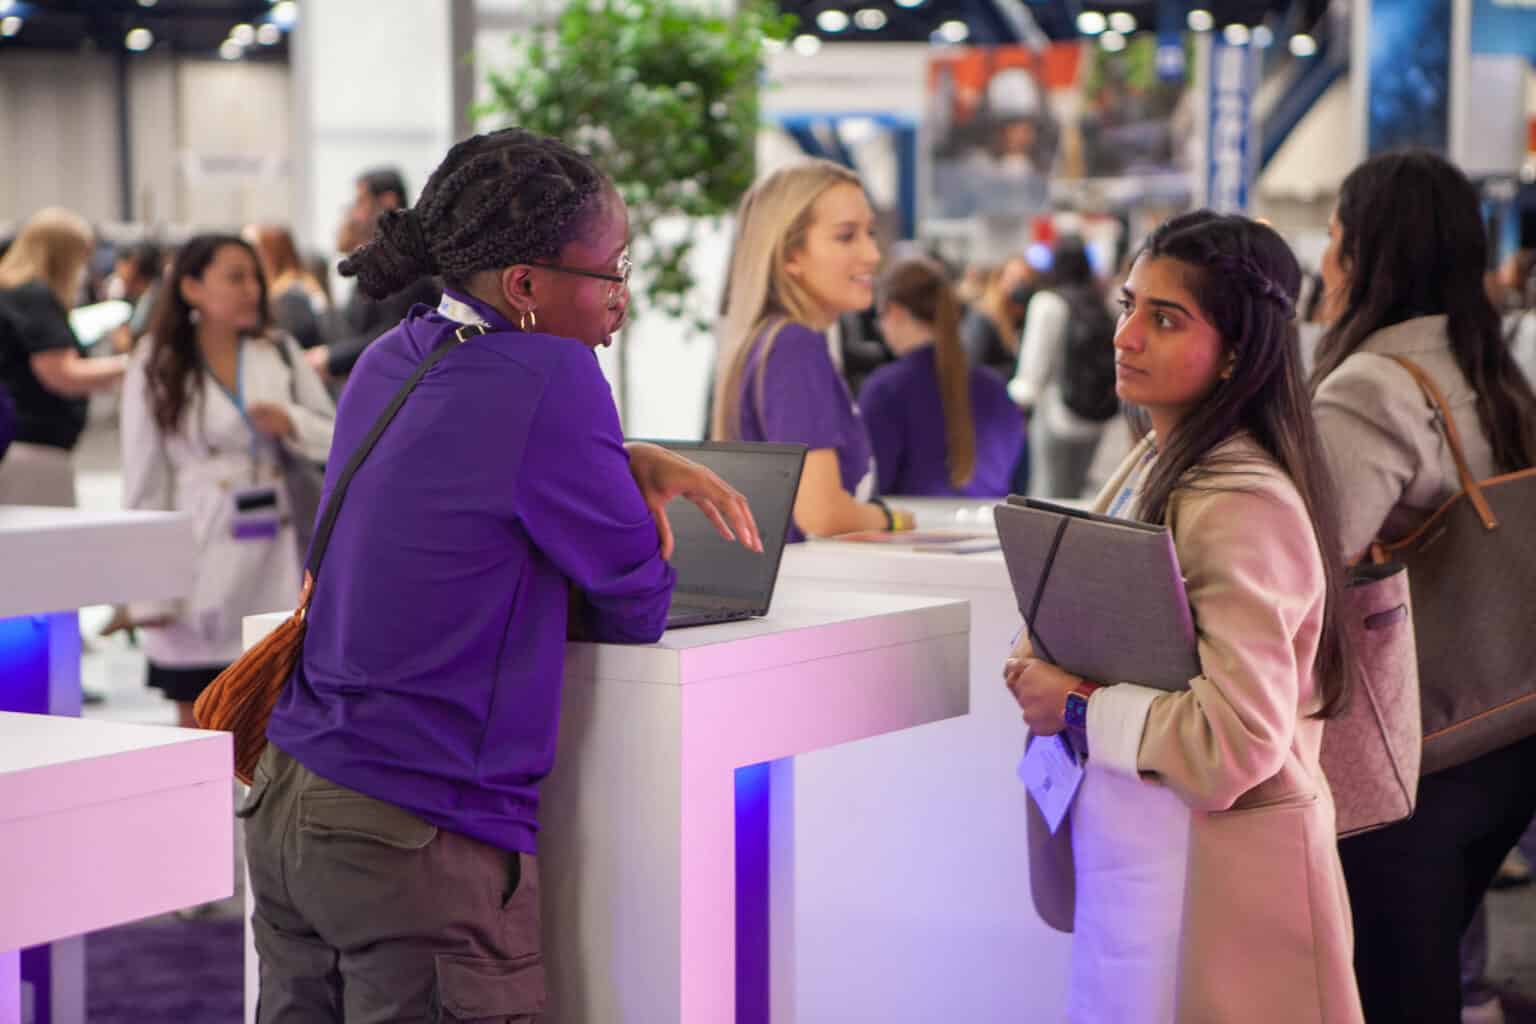 WE23 World's Largest Career Fair for Women Engineers and Technologists